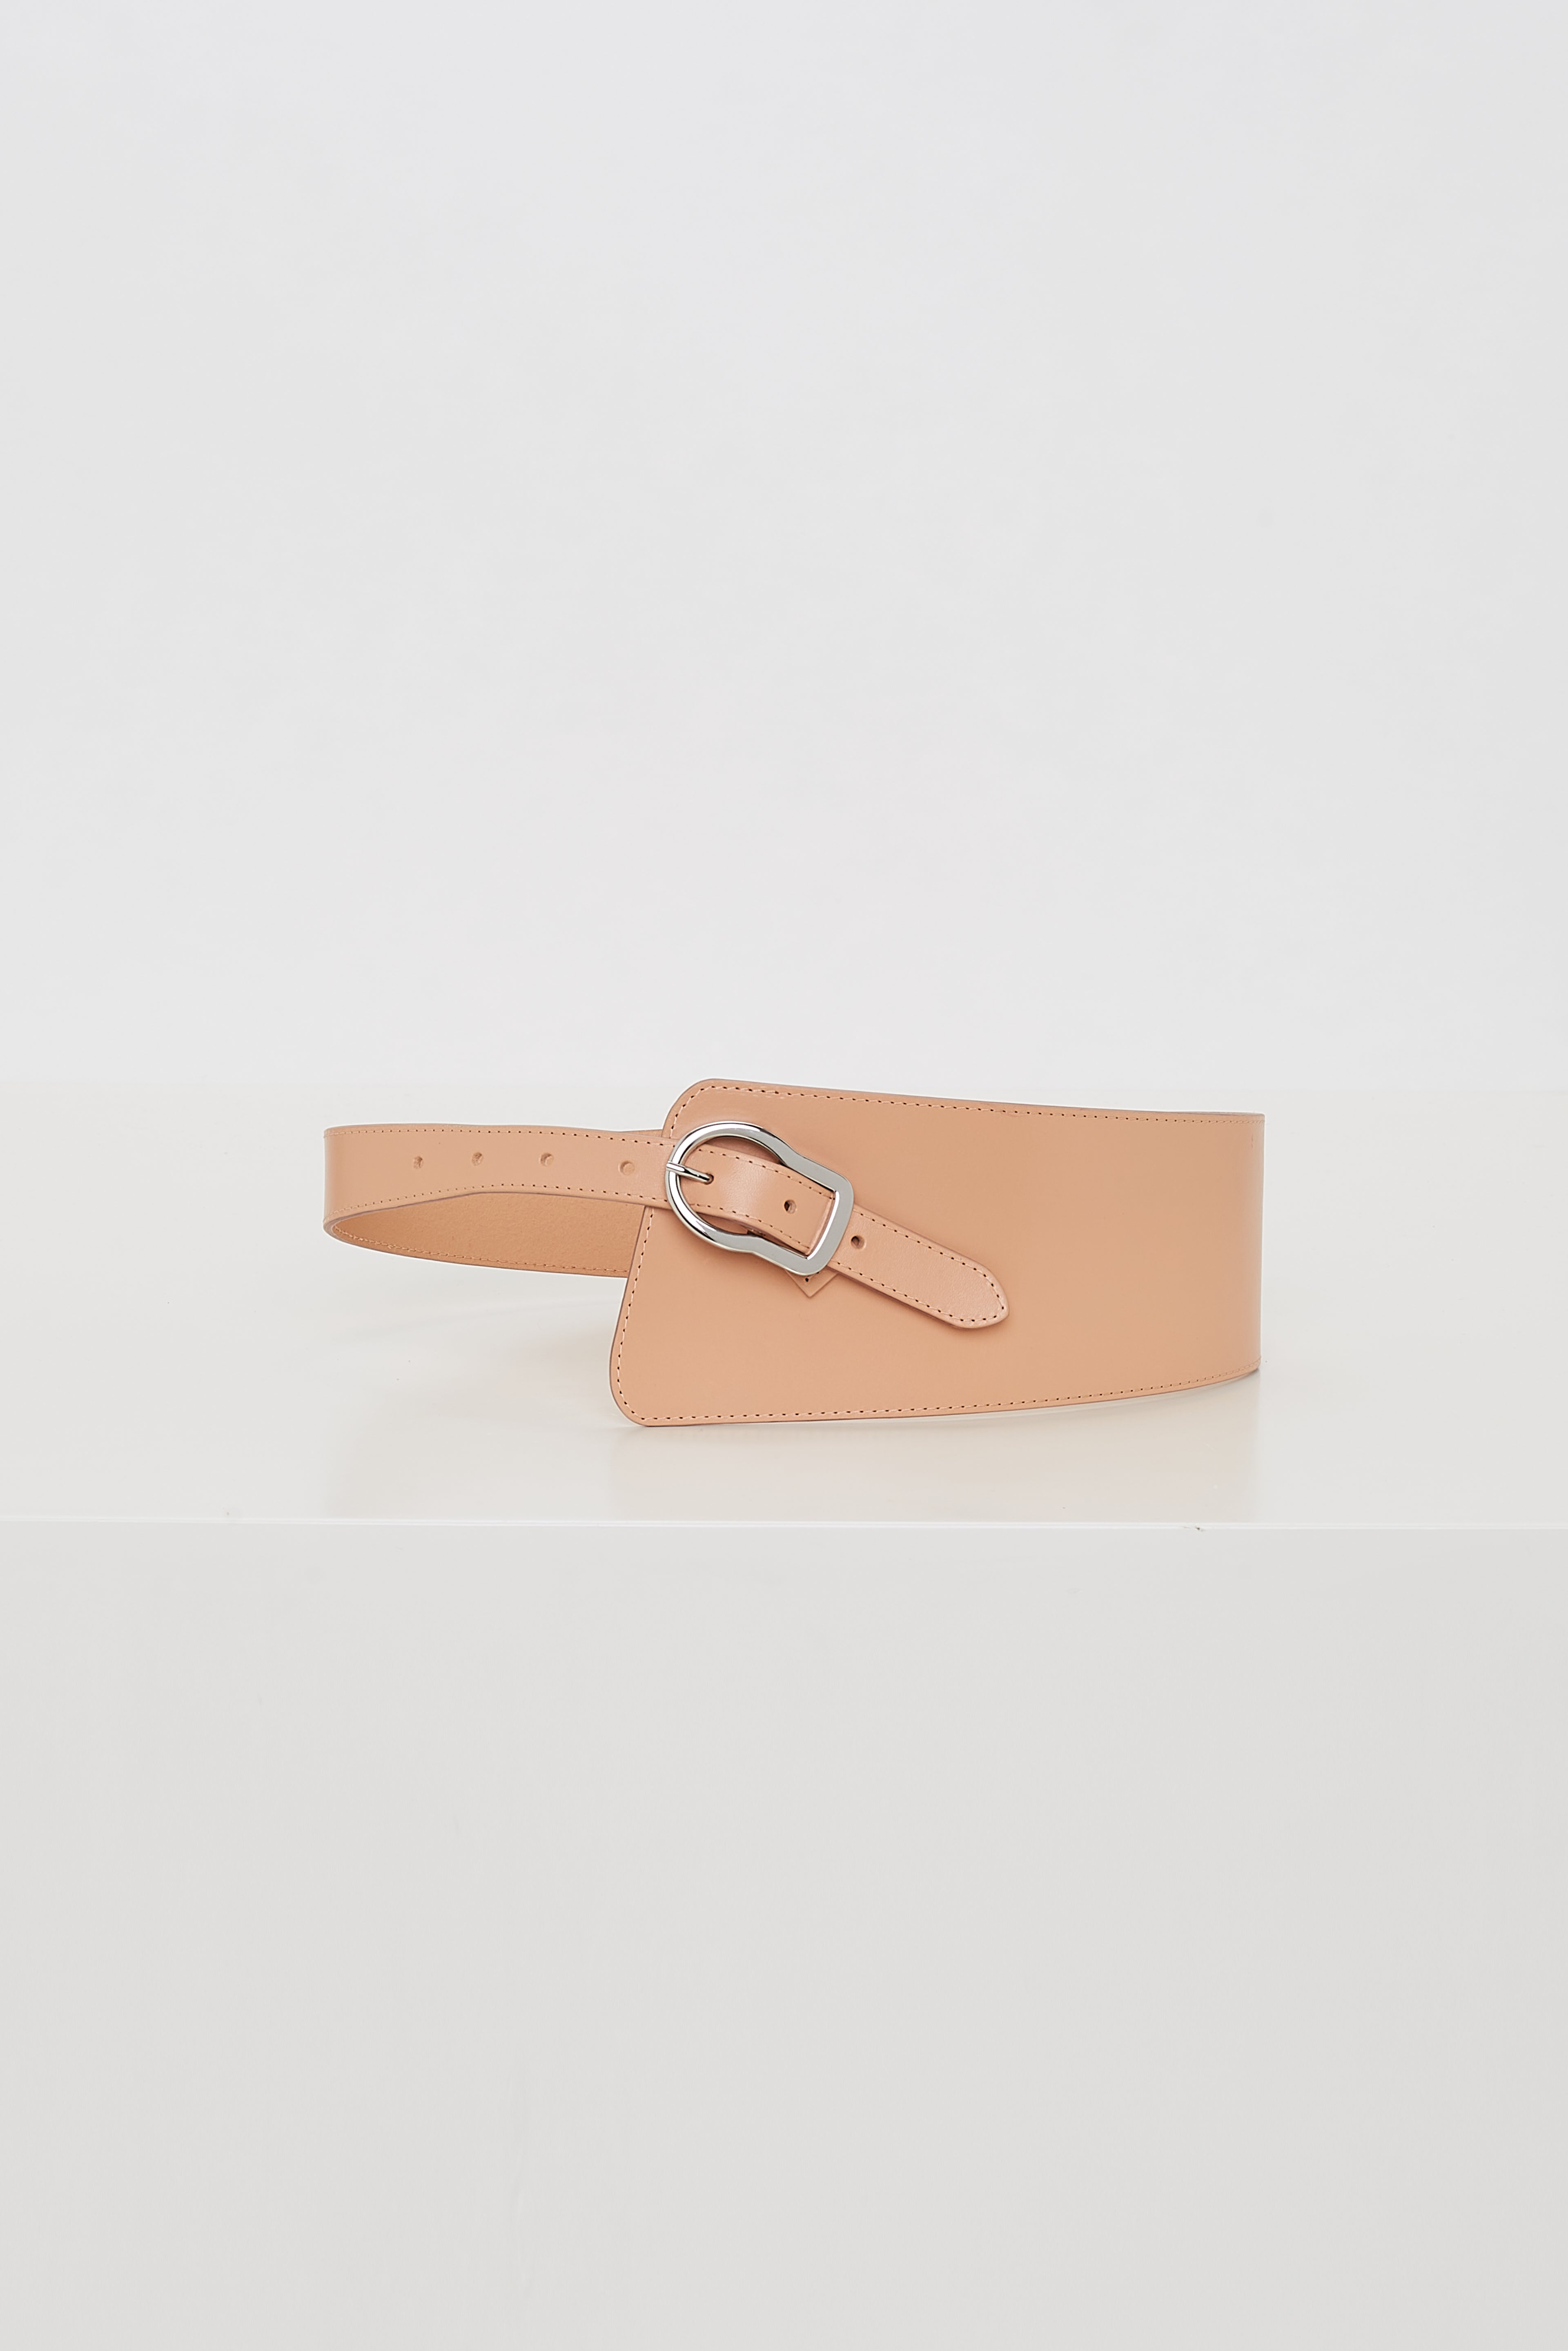 Dorothee-Schumacher-OUTLET-SALE-MIRROR-TOUCH-wide-belt-Accessoires-ARCHIVE-COLLECTION.jpg